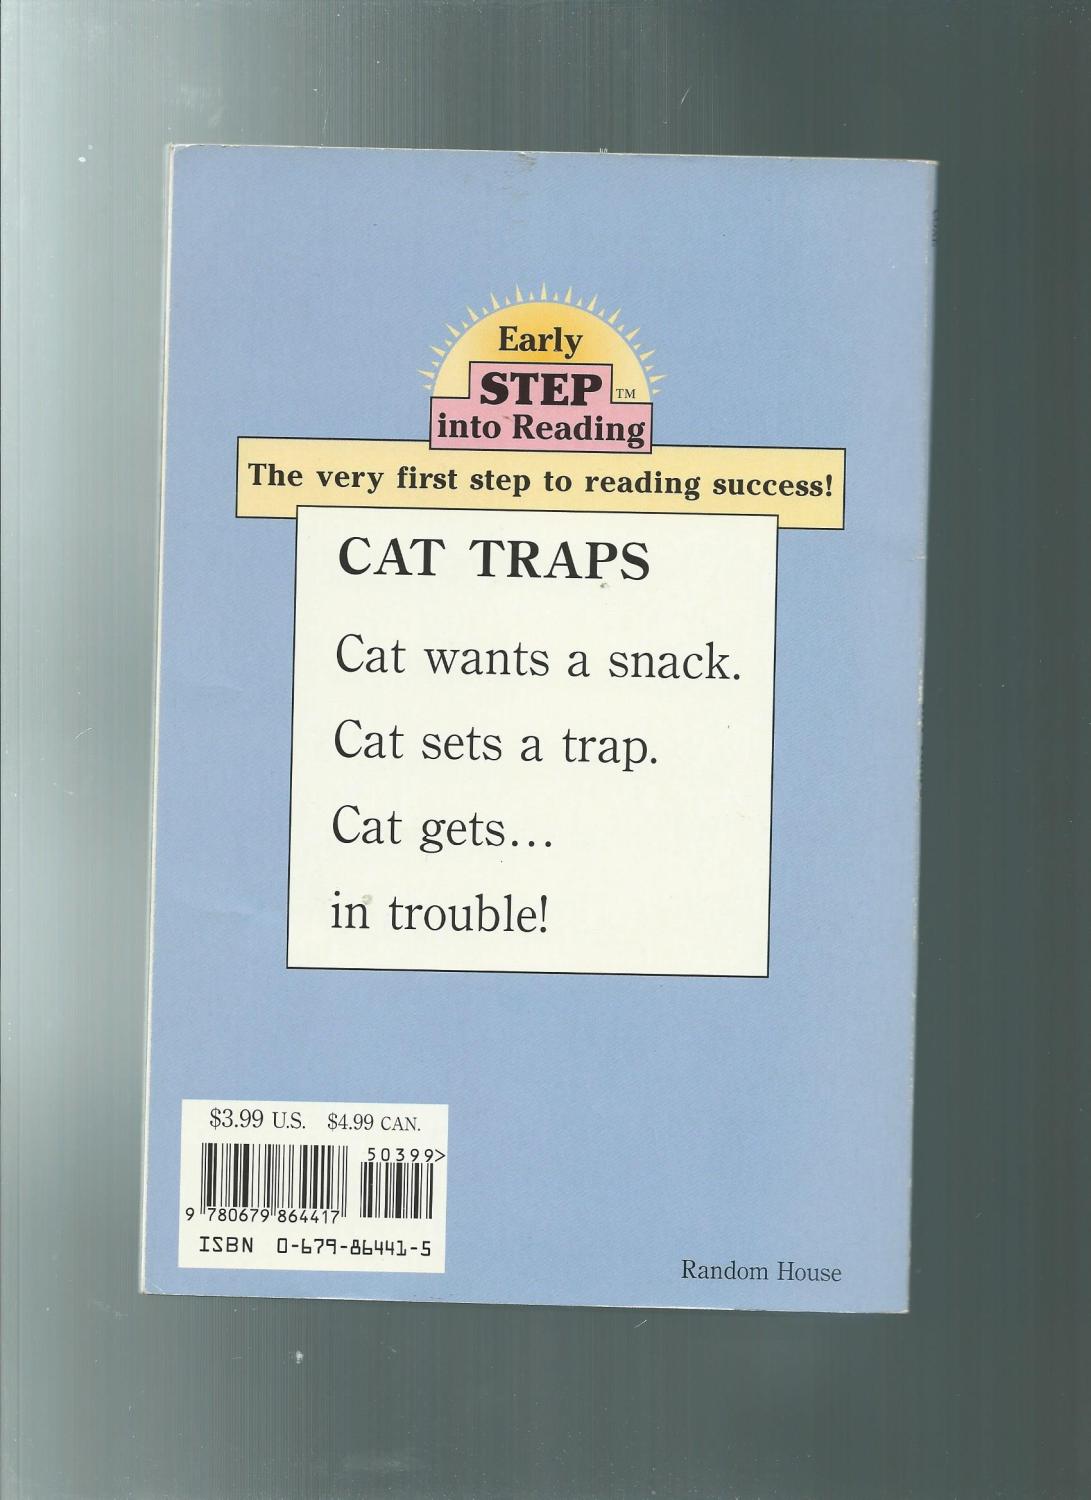 Cat Traps by Molly Coxe: 9780679864417 | : Books